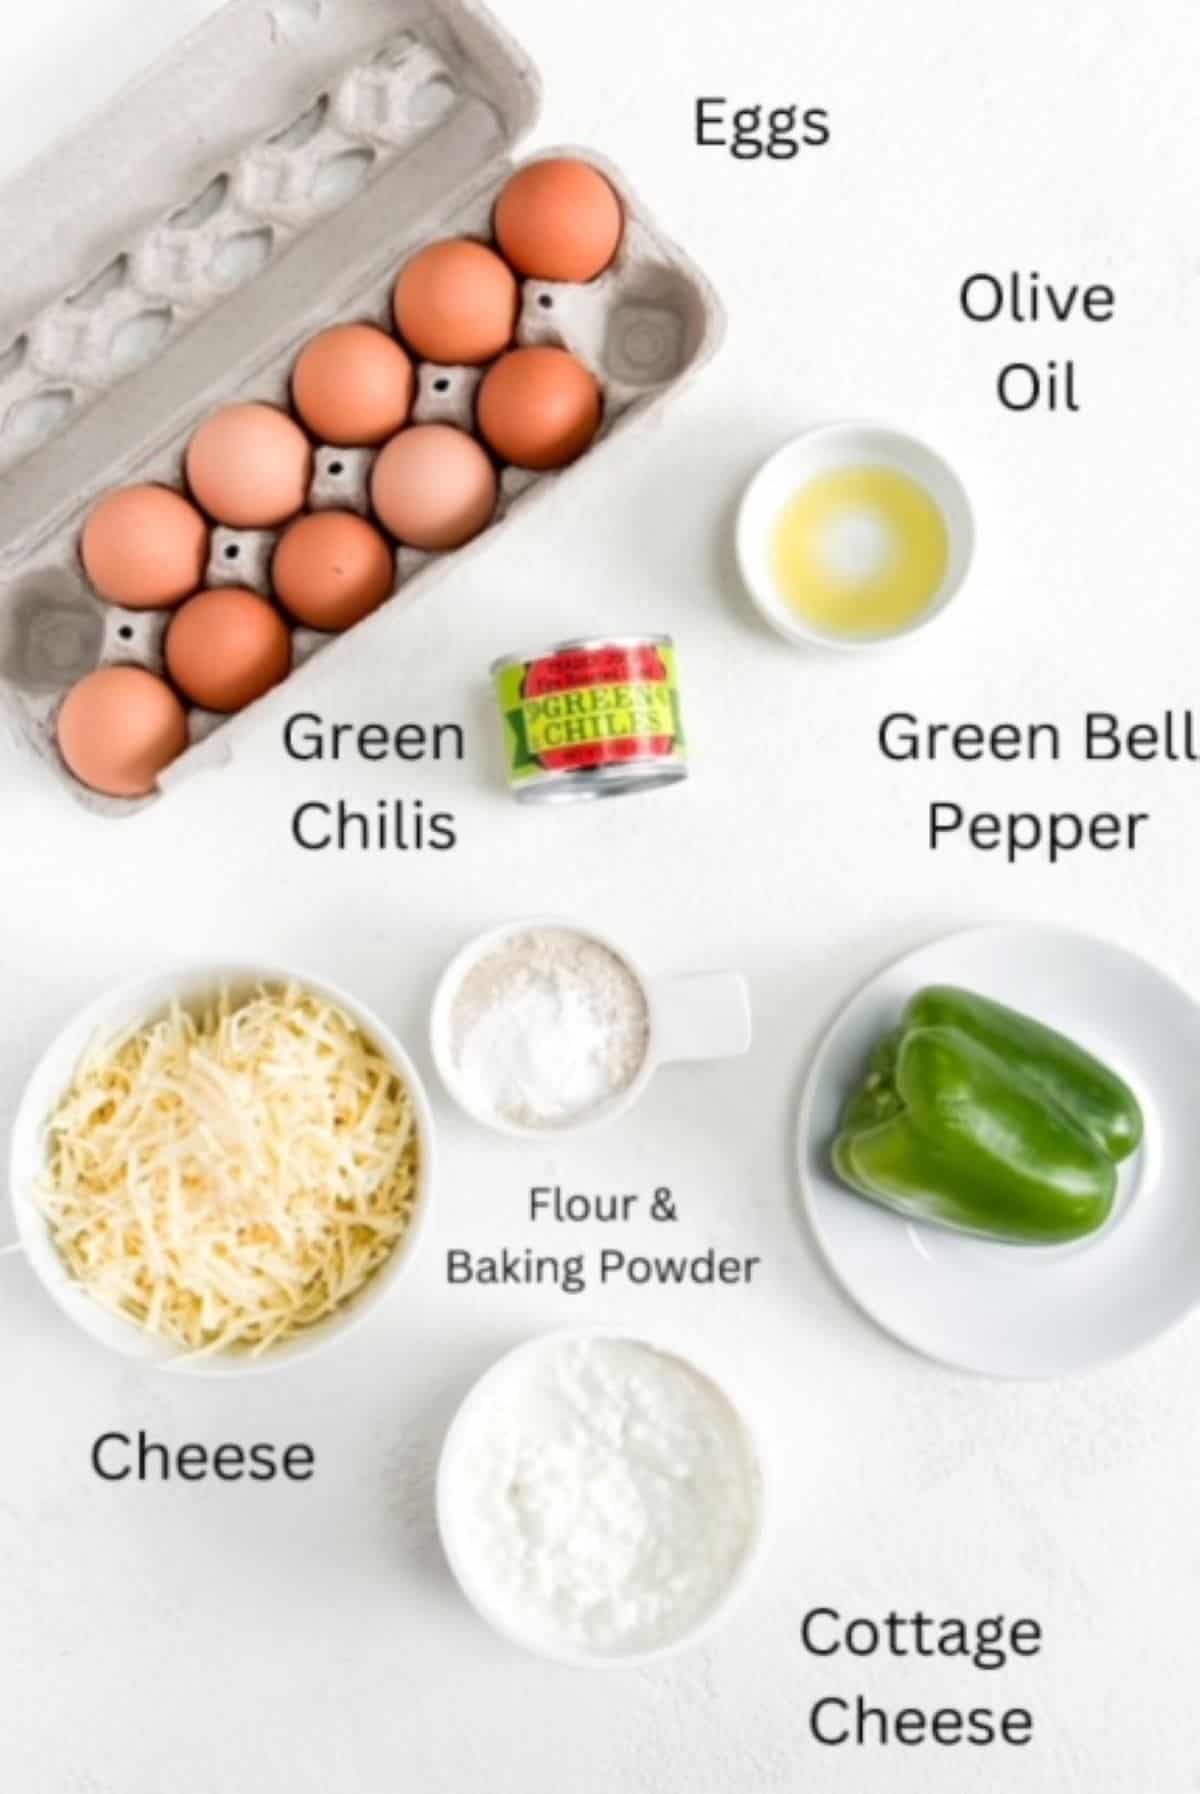 Ingredients to make an egg casserole with green chiles, labeled.